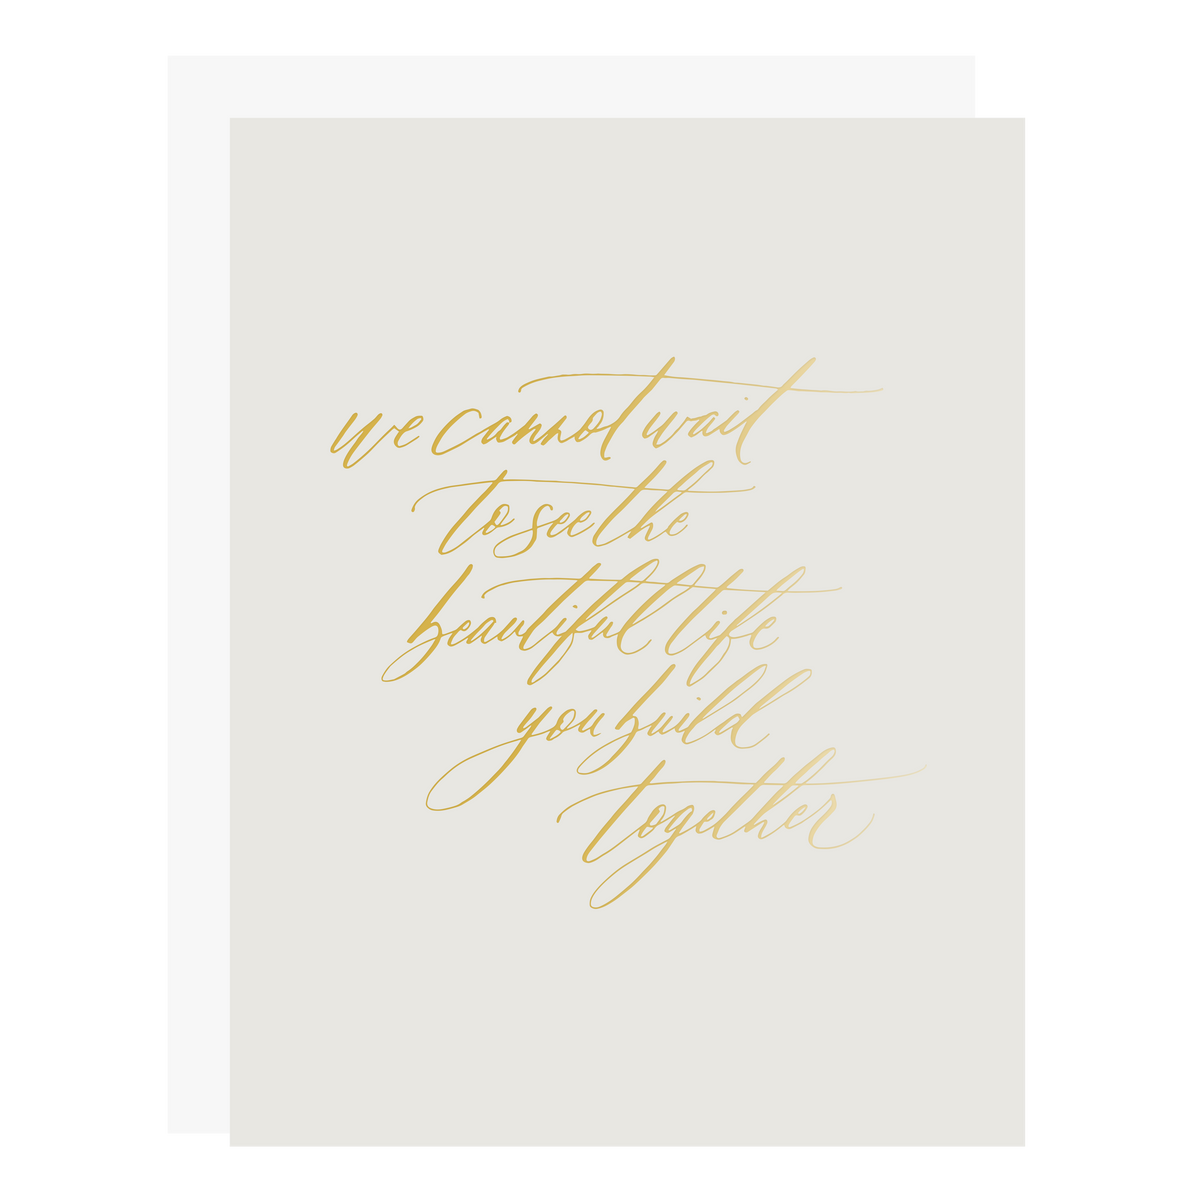 Beautiful Life Together wedding and engagement card, letterpress printed by hand with gold foil.